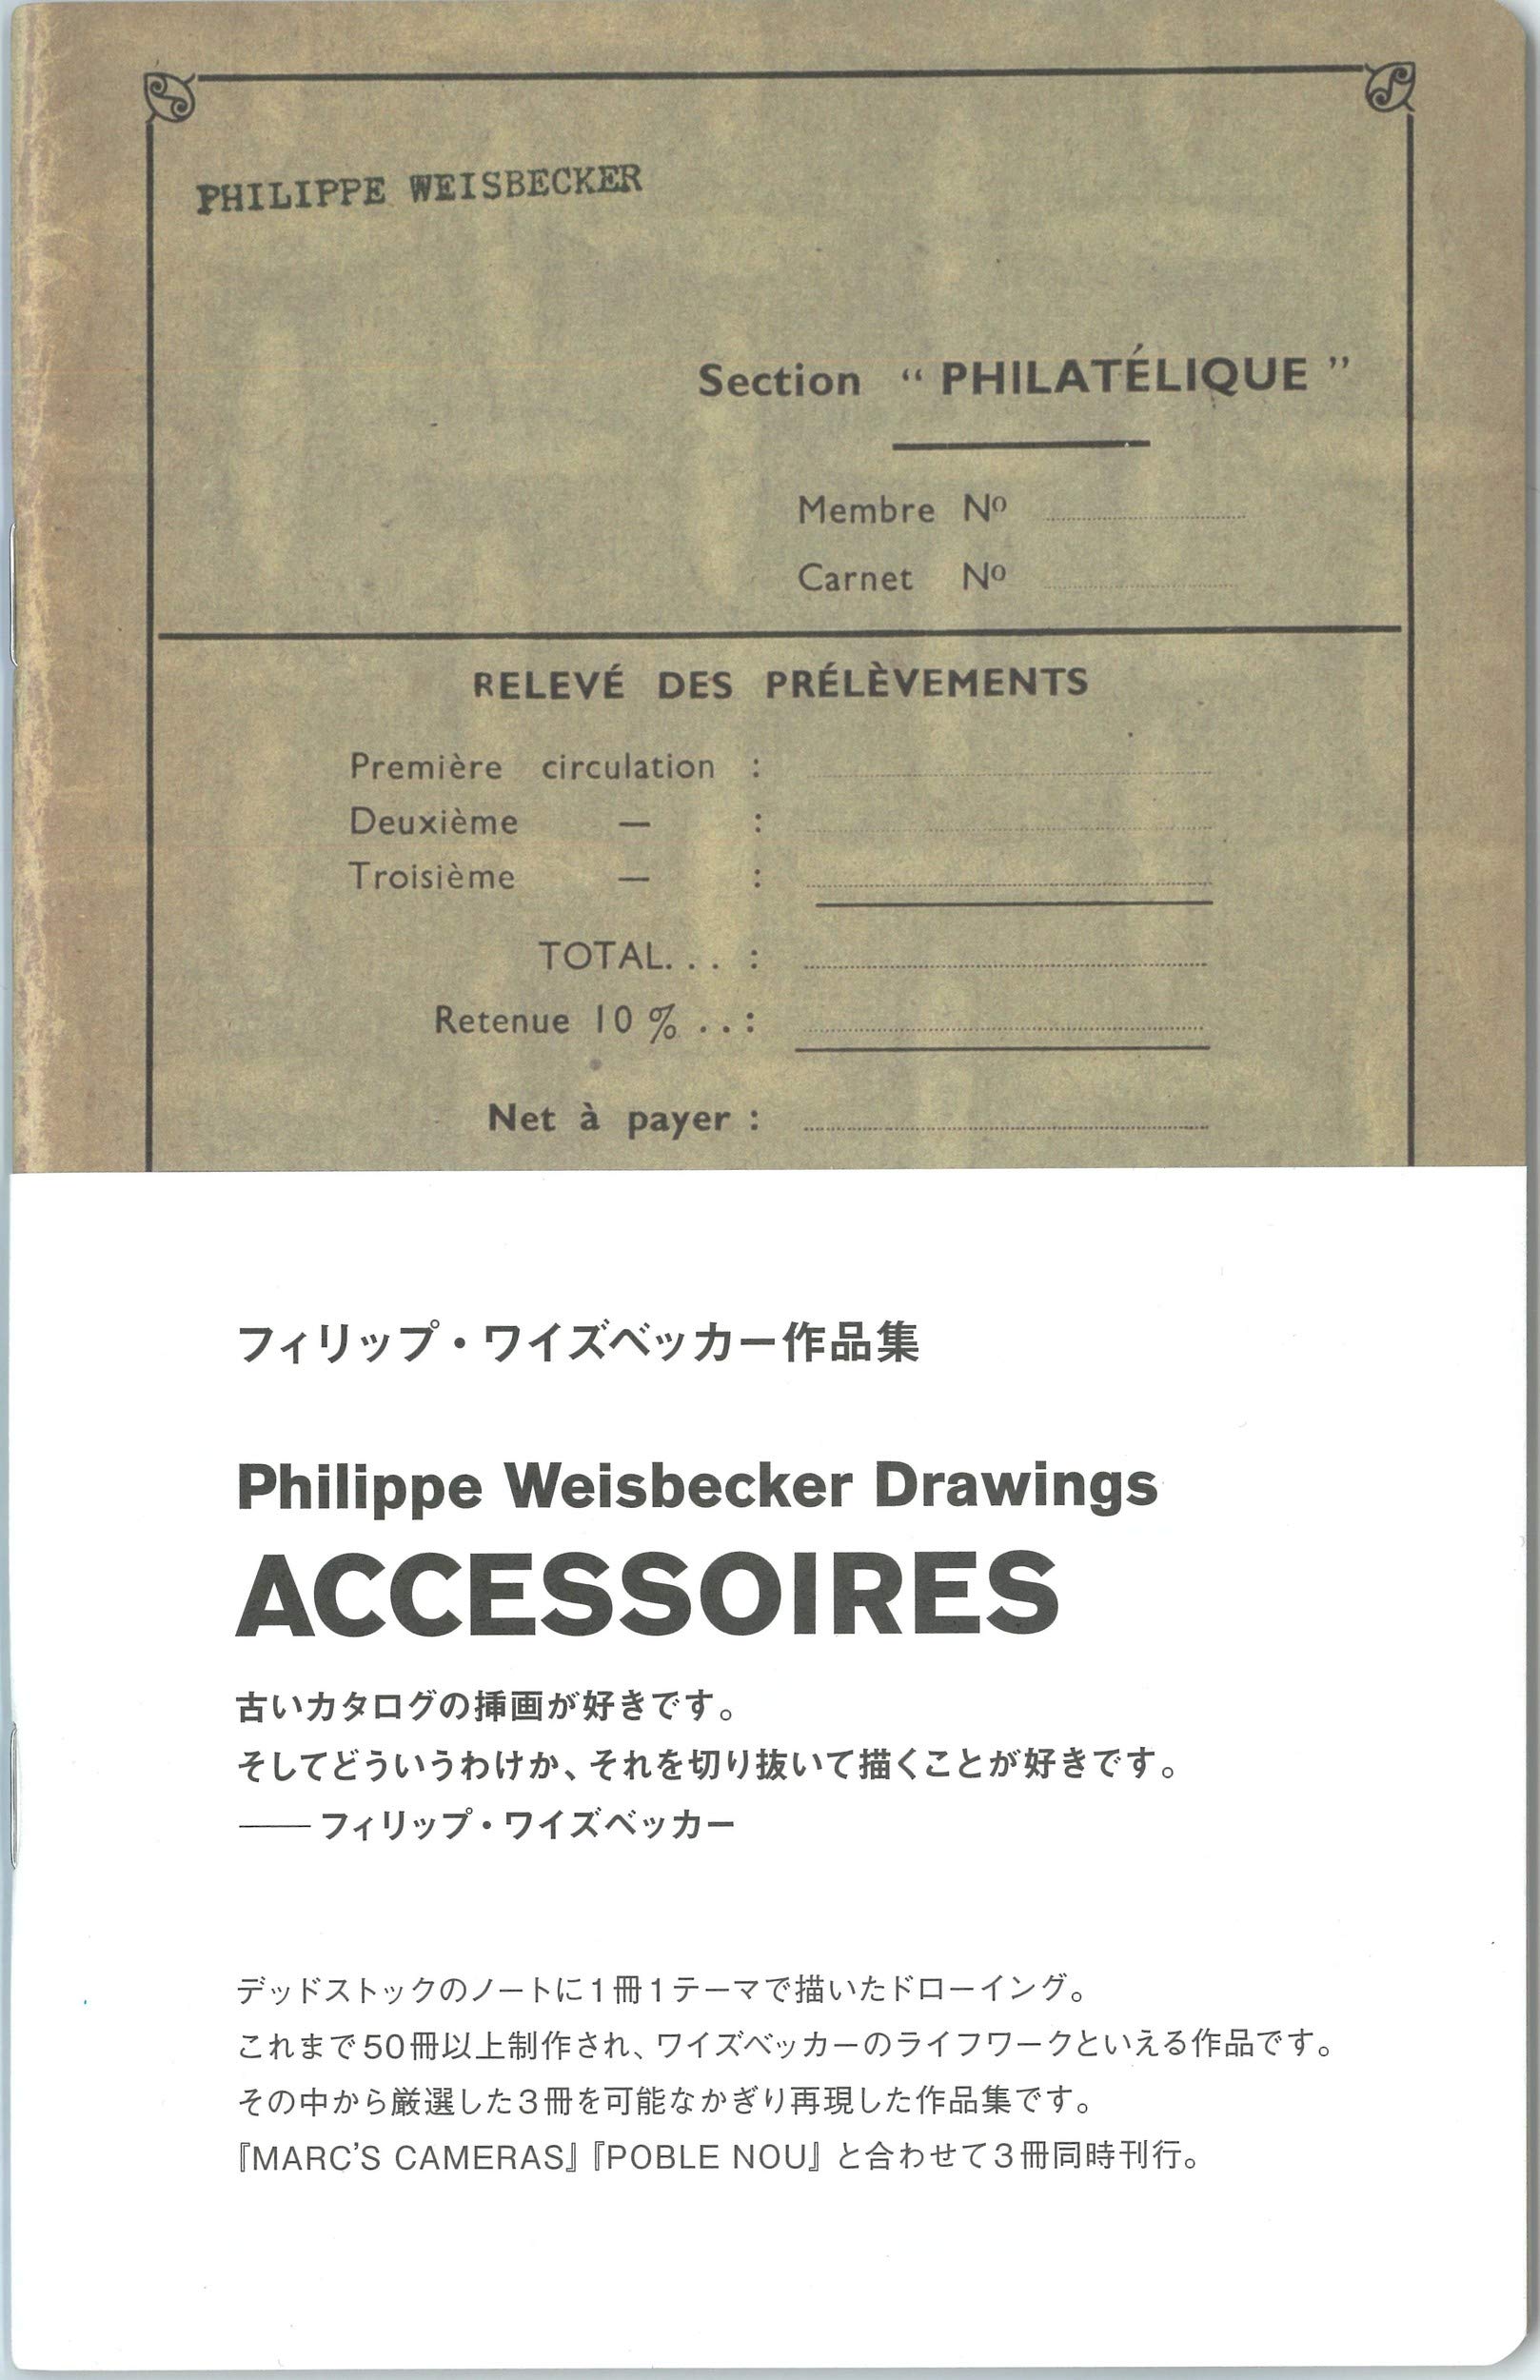 Philippe Weisbecker Drawings – ACCESSOIRES – Japanese Creative